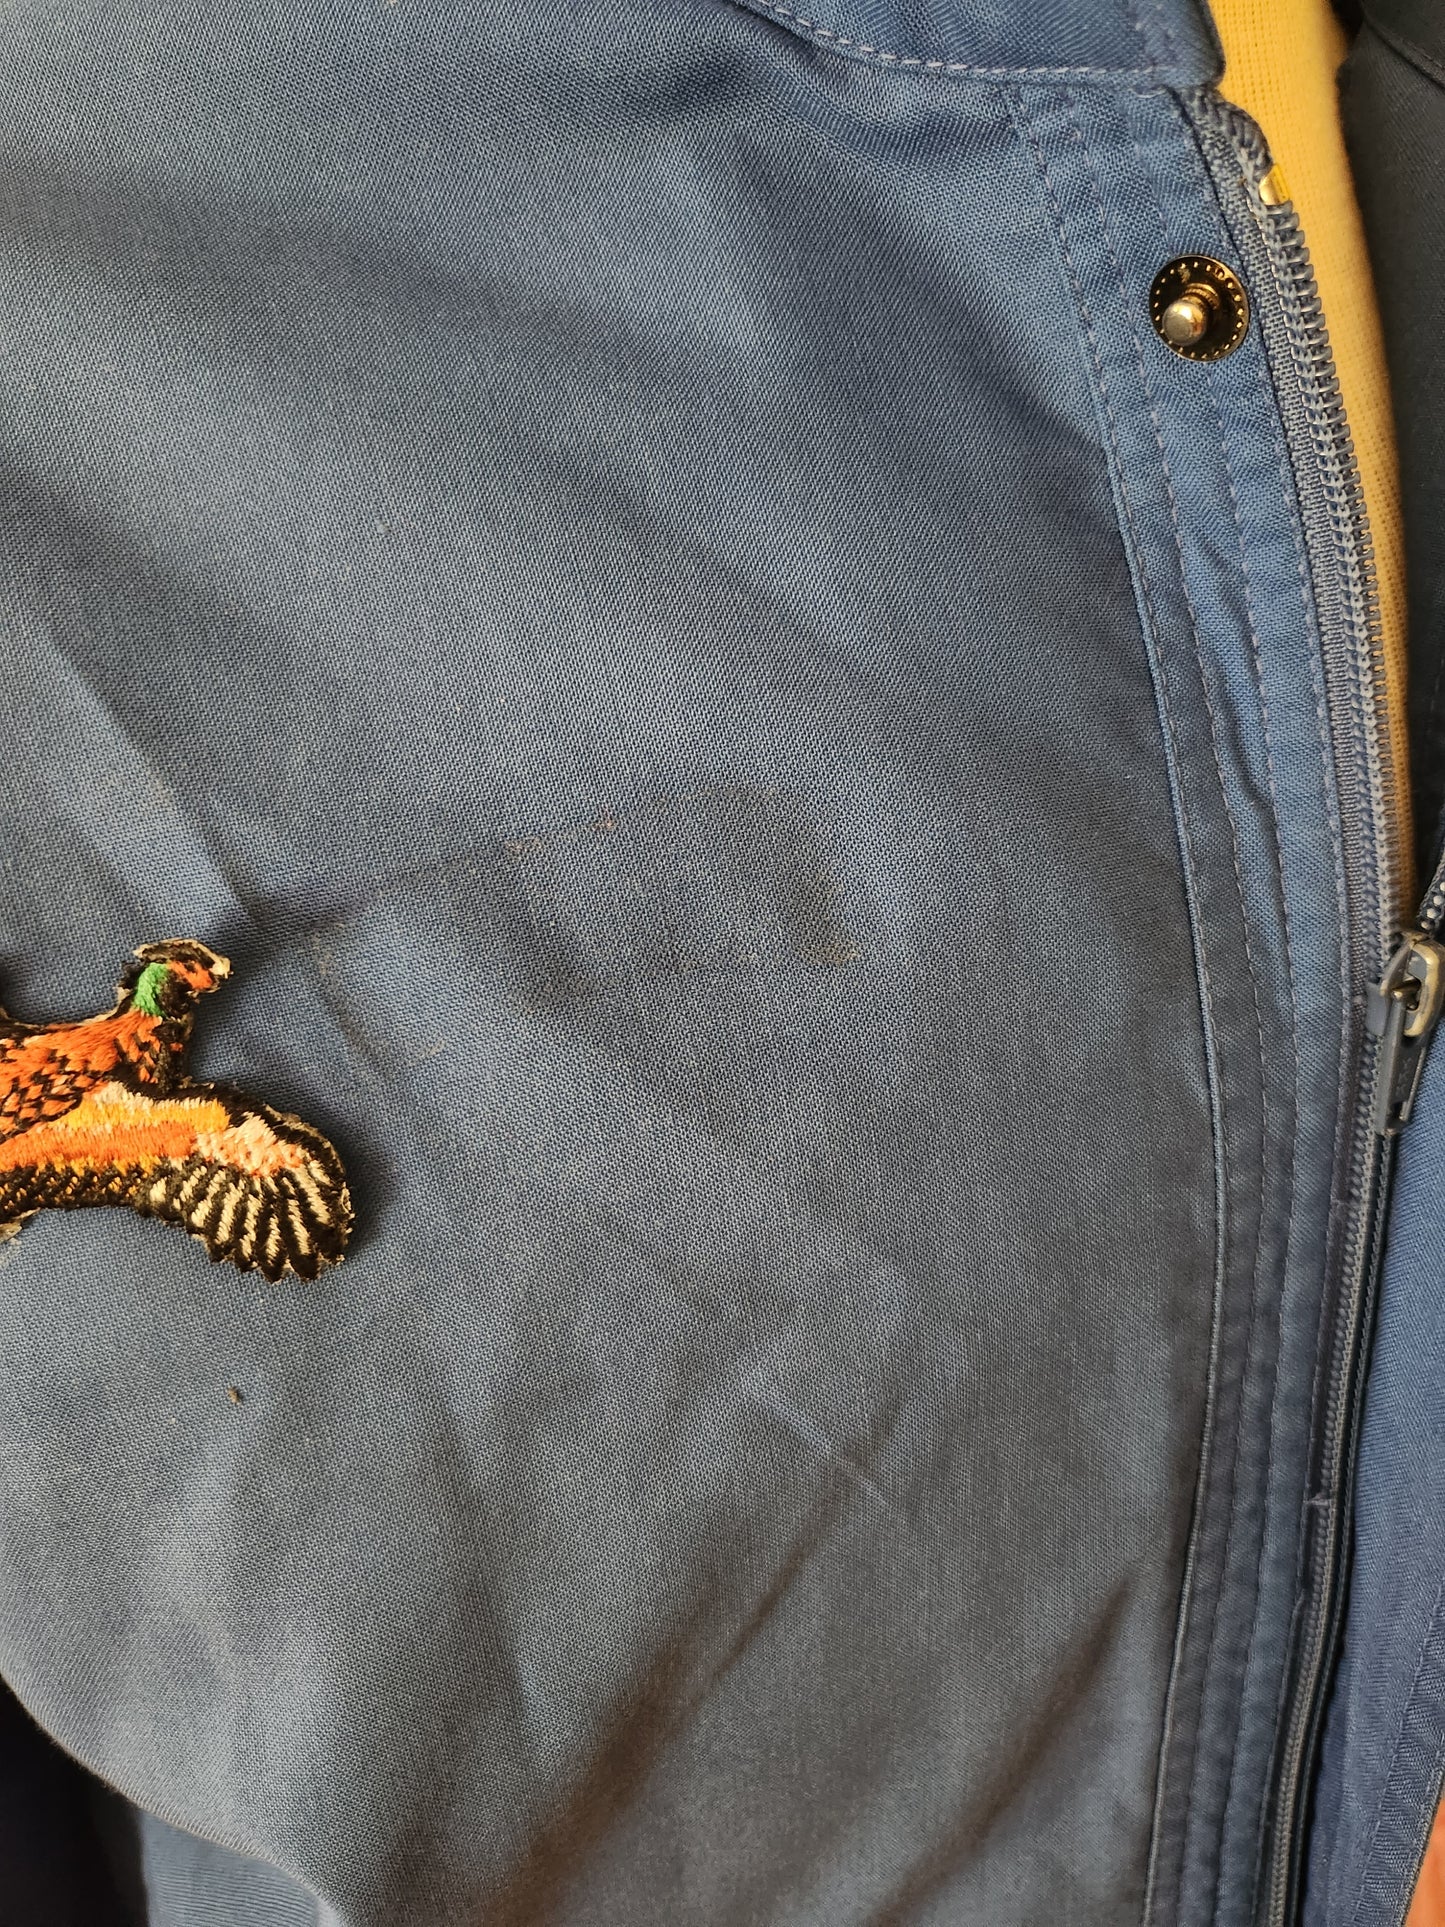 Vintage Blue Jacket with Bird Patches